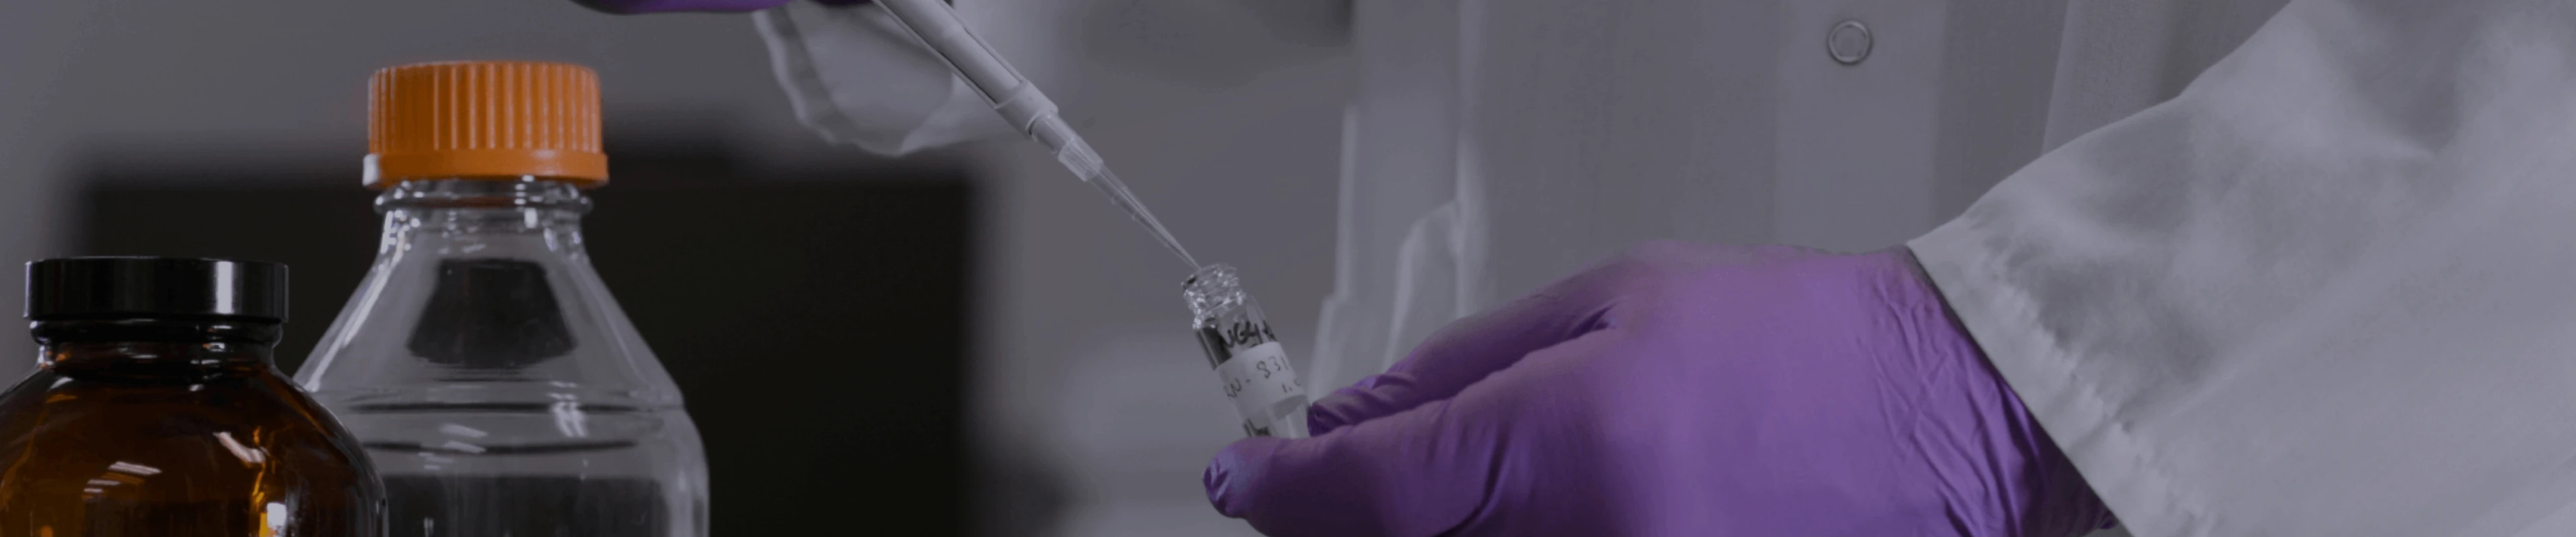 HCP using a pipette